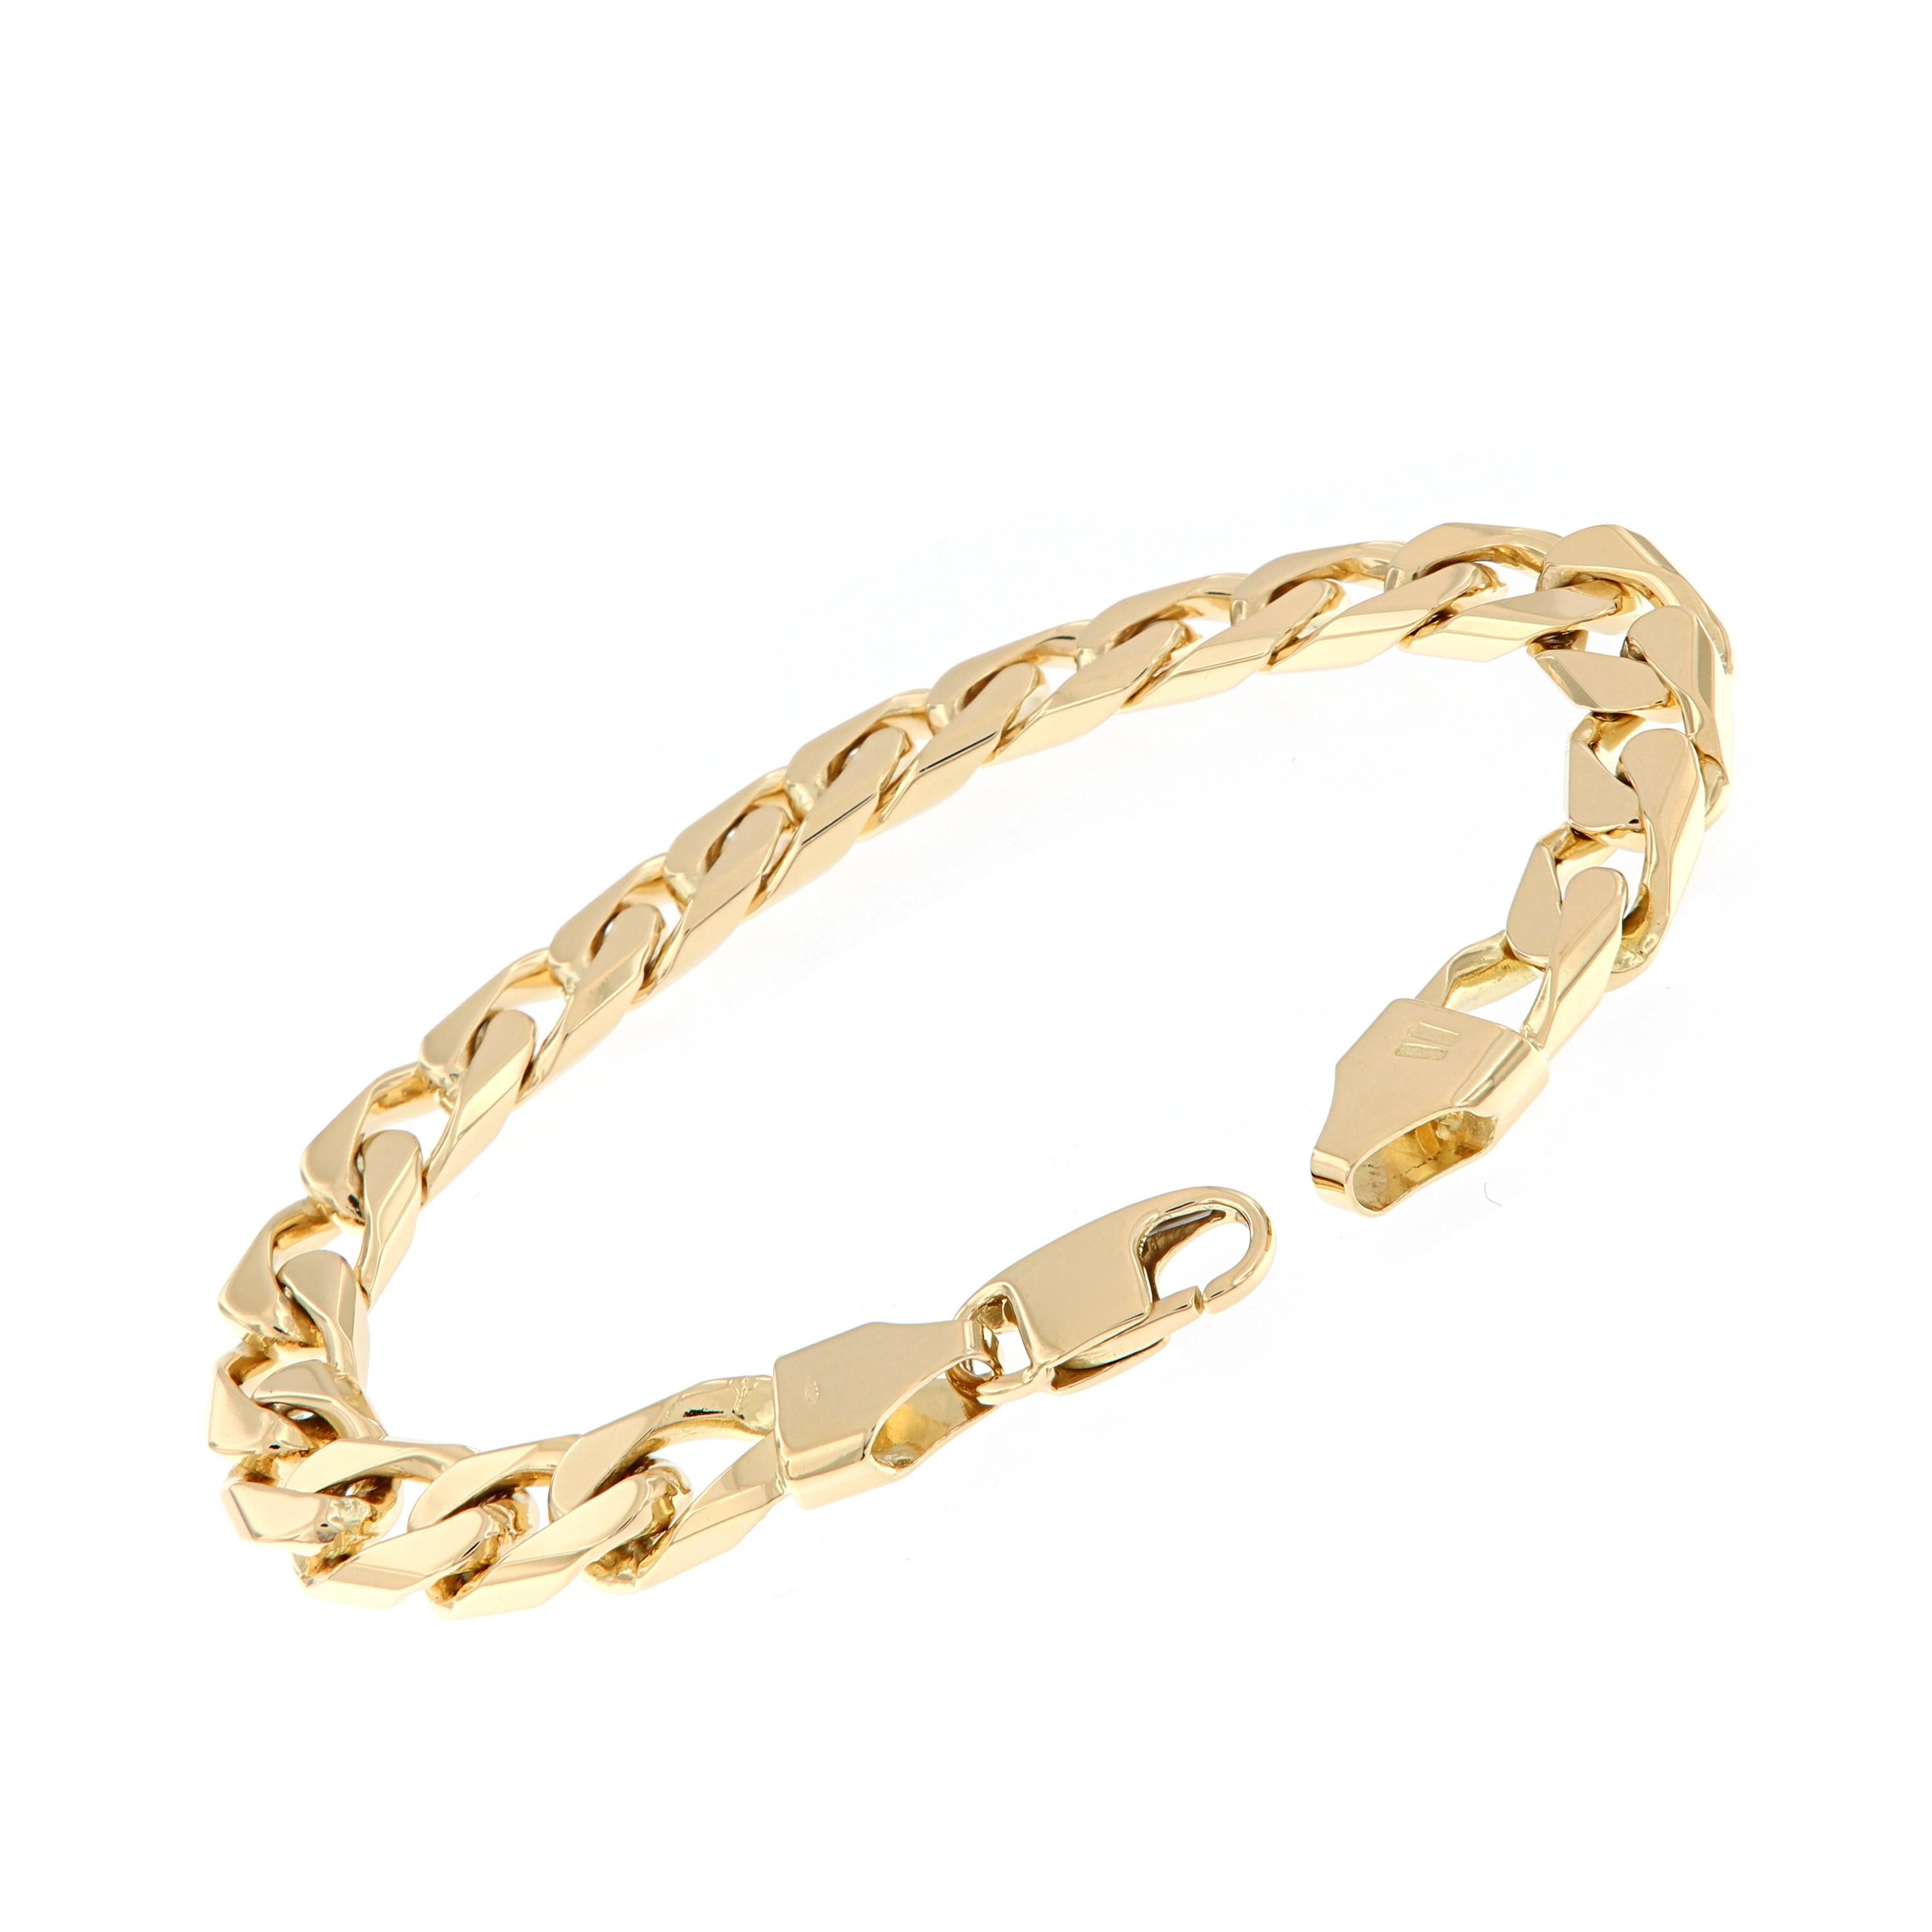 Crafted in classic and luxurious 18k yellow gold, featuring a lobster clasp that assures the wearer a safe and secure fit at all times. This estate piece is in excellent condition. Width is 8.5 millemeters. Length is 12.5 inches. Weighs 48.7 grams.